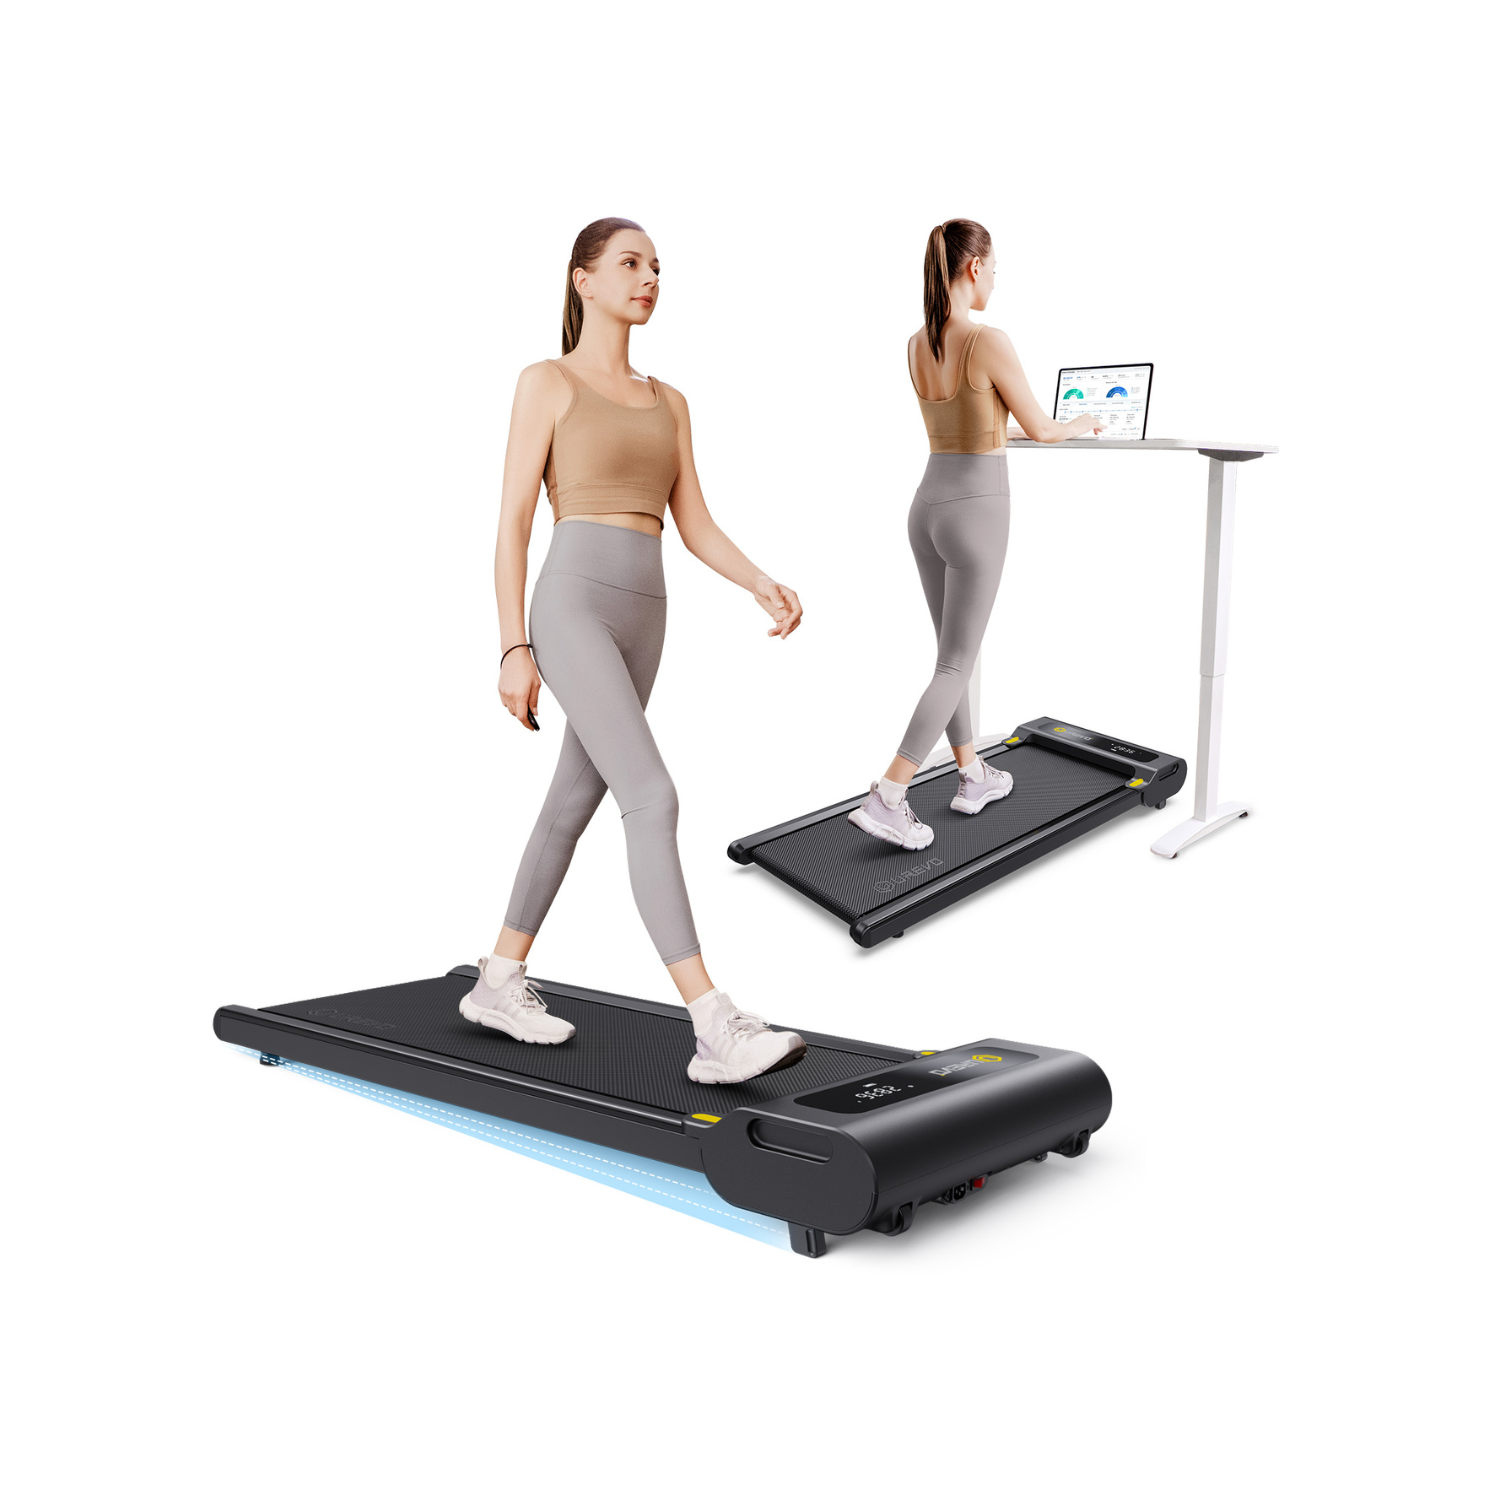  Treadmill Under Desk with Incline Walking Pad for